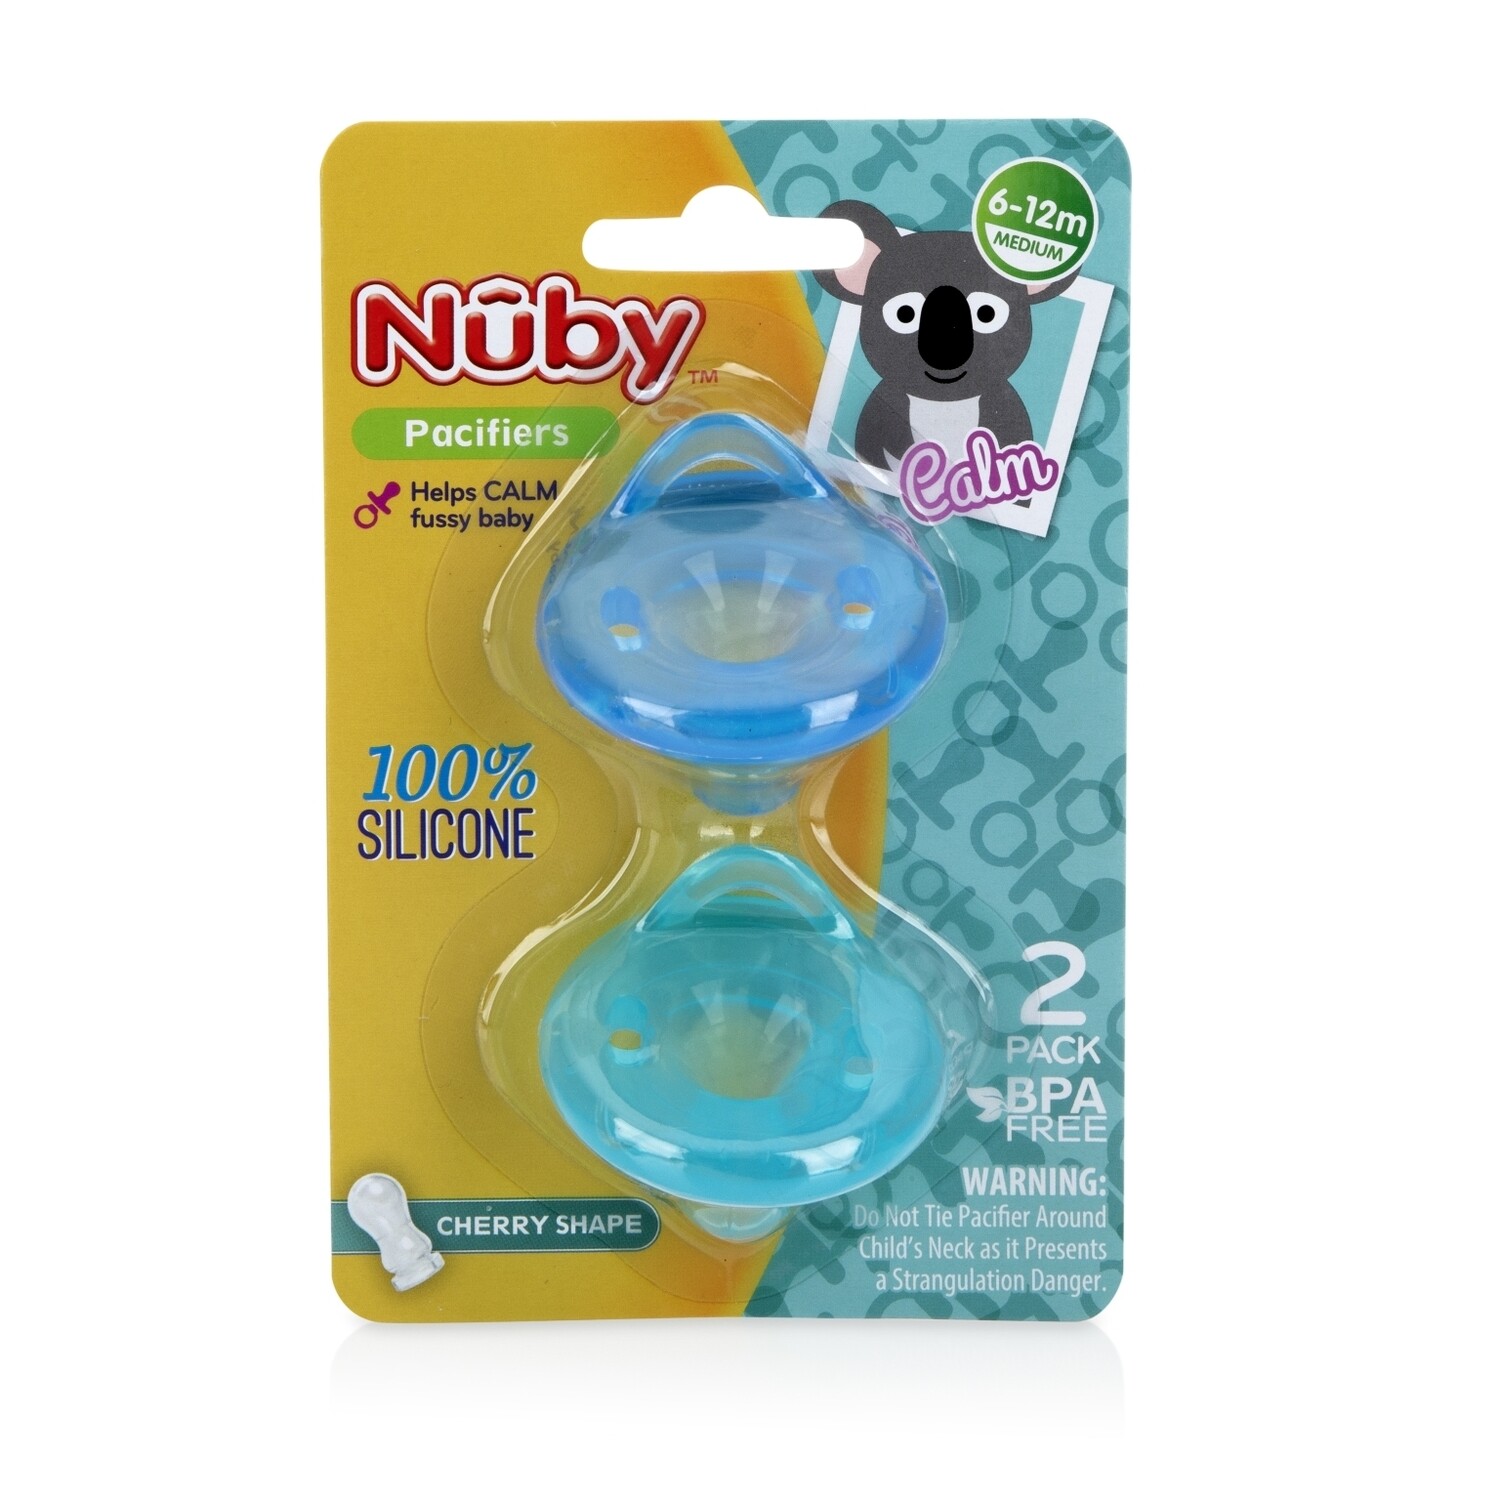 . Case of [72] Nuby Pacifiers - 2 Count, Silicone, Cherry Shape .